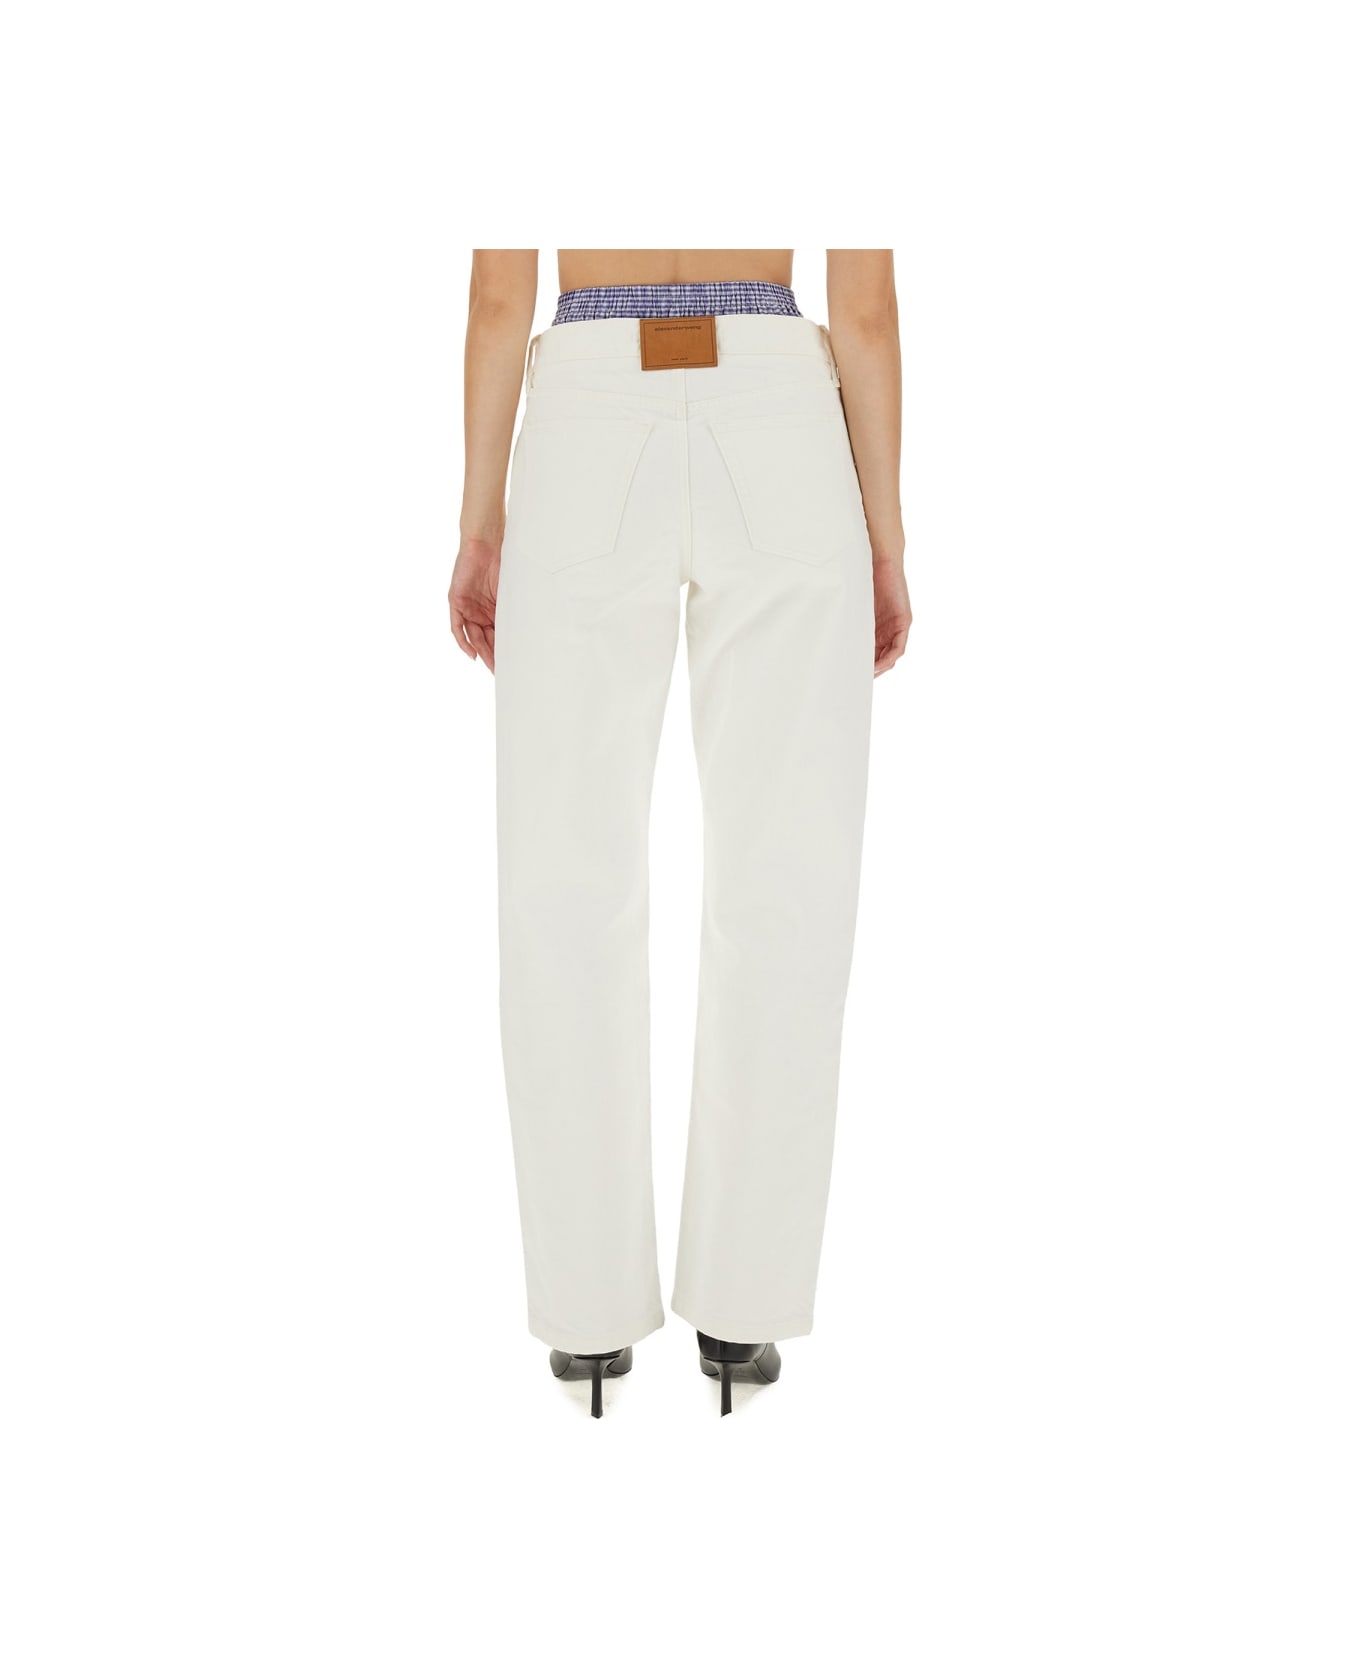 Alexander Wang Skater Jeans With High Waist Boxer Shorts - WHITE